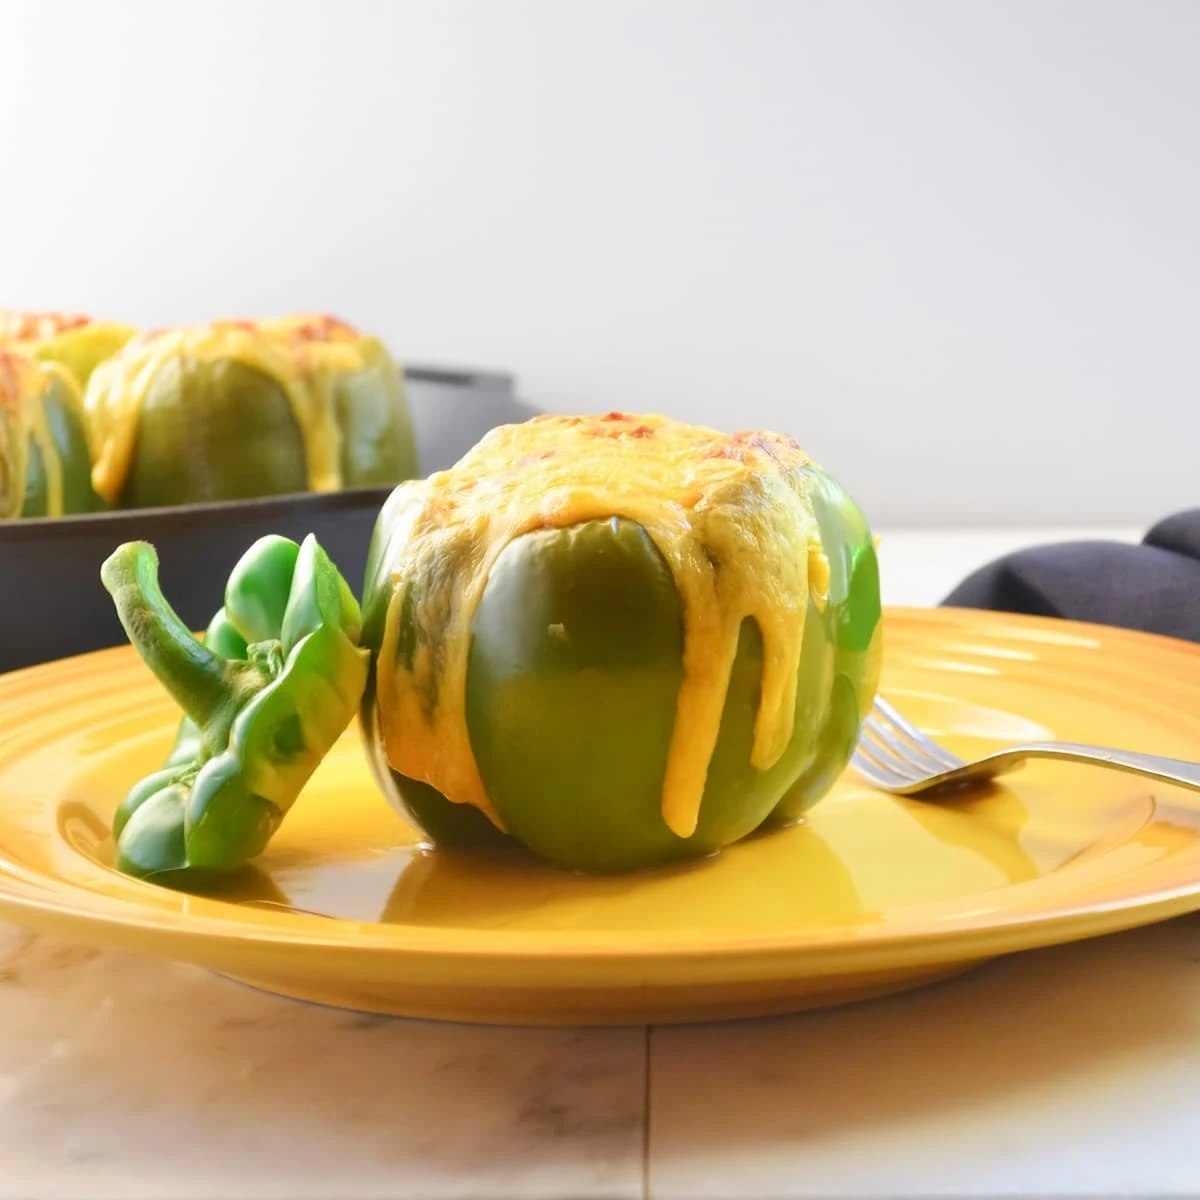 A side shot of a Stuffed Bell Pepper on a yellow plate with a cast iron skillet full of Stuffed Bell Peppers on a white marble counter top.